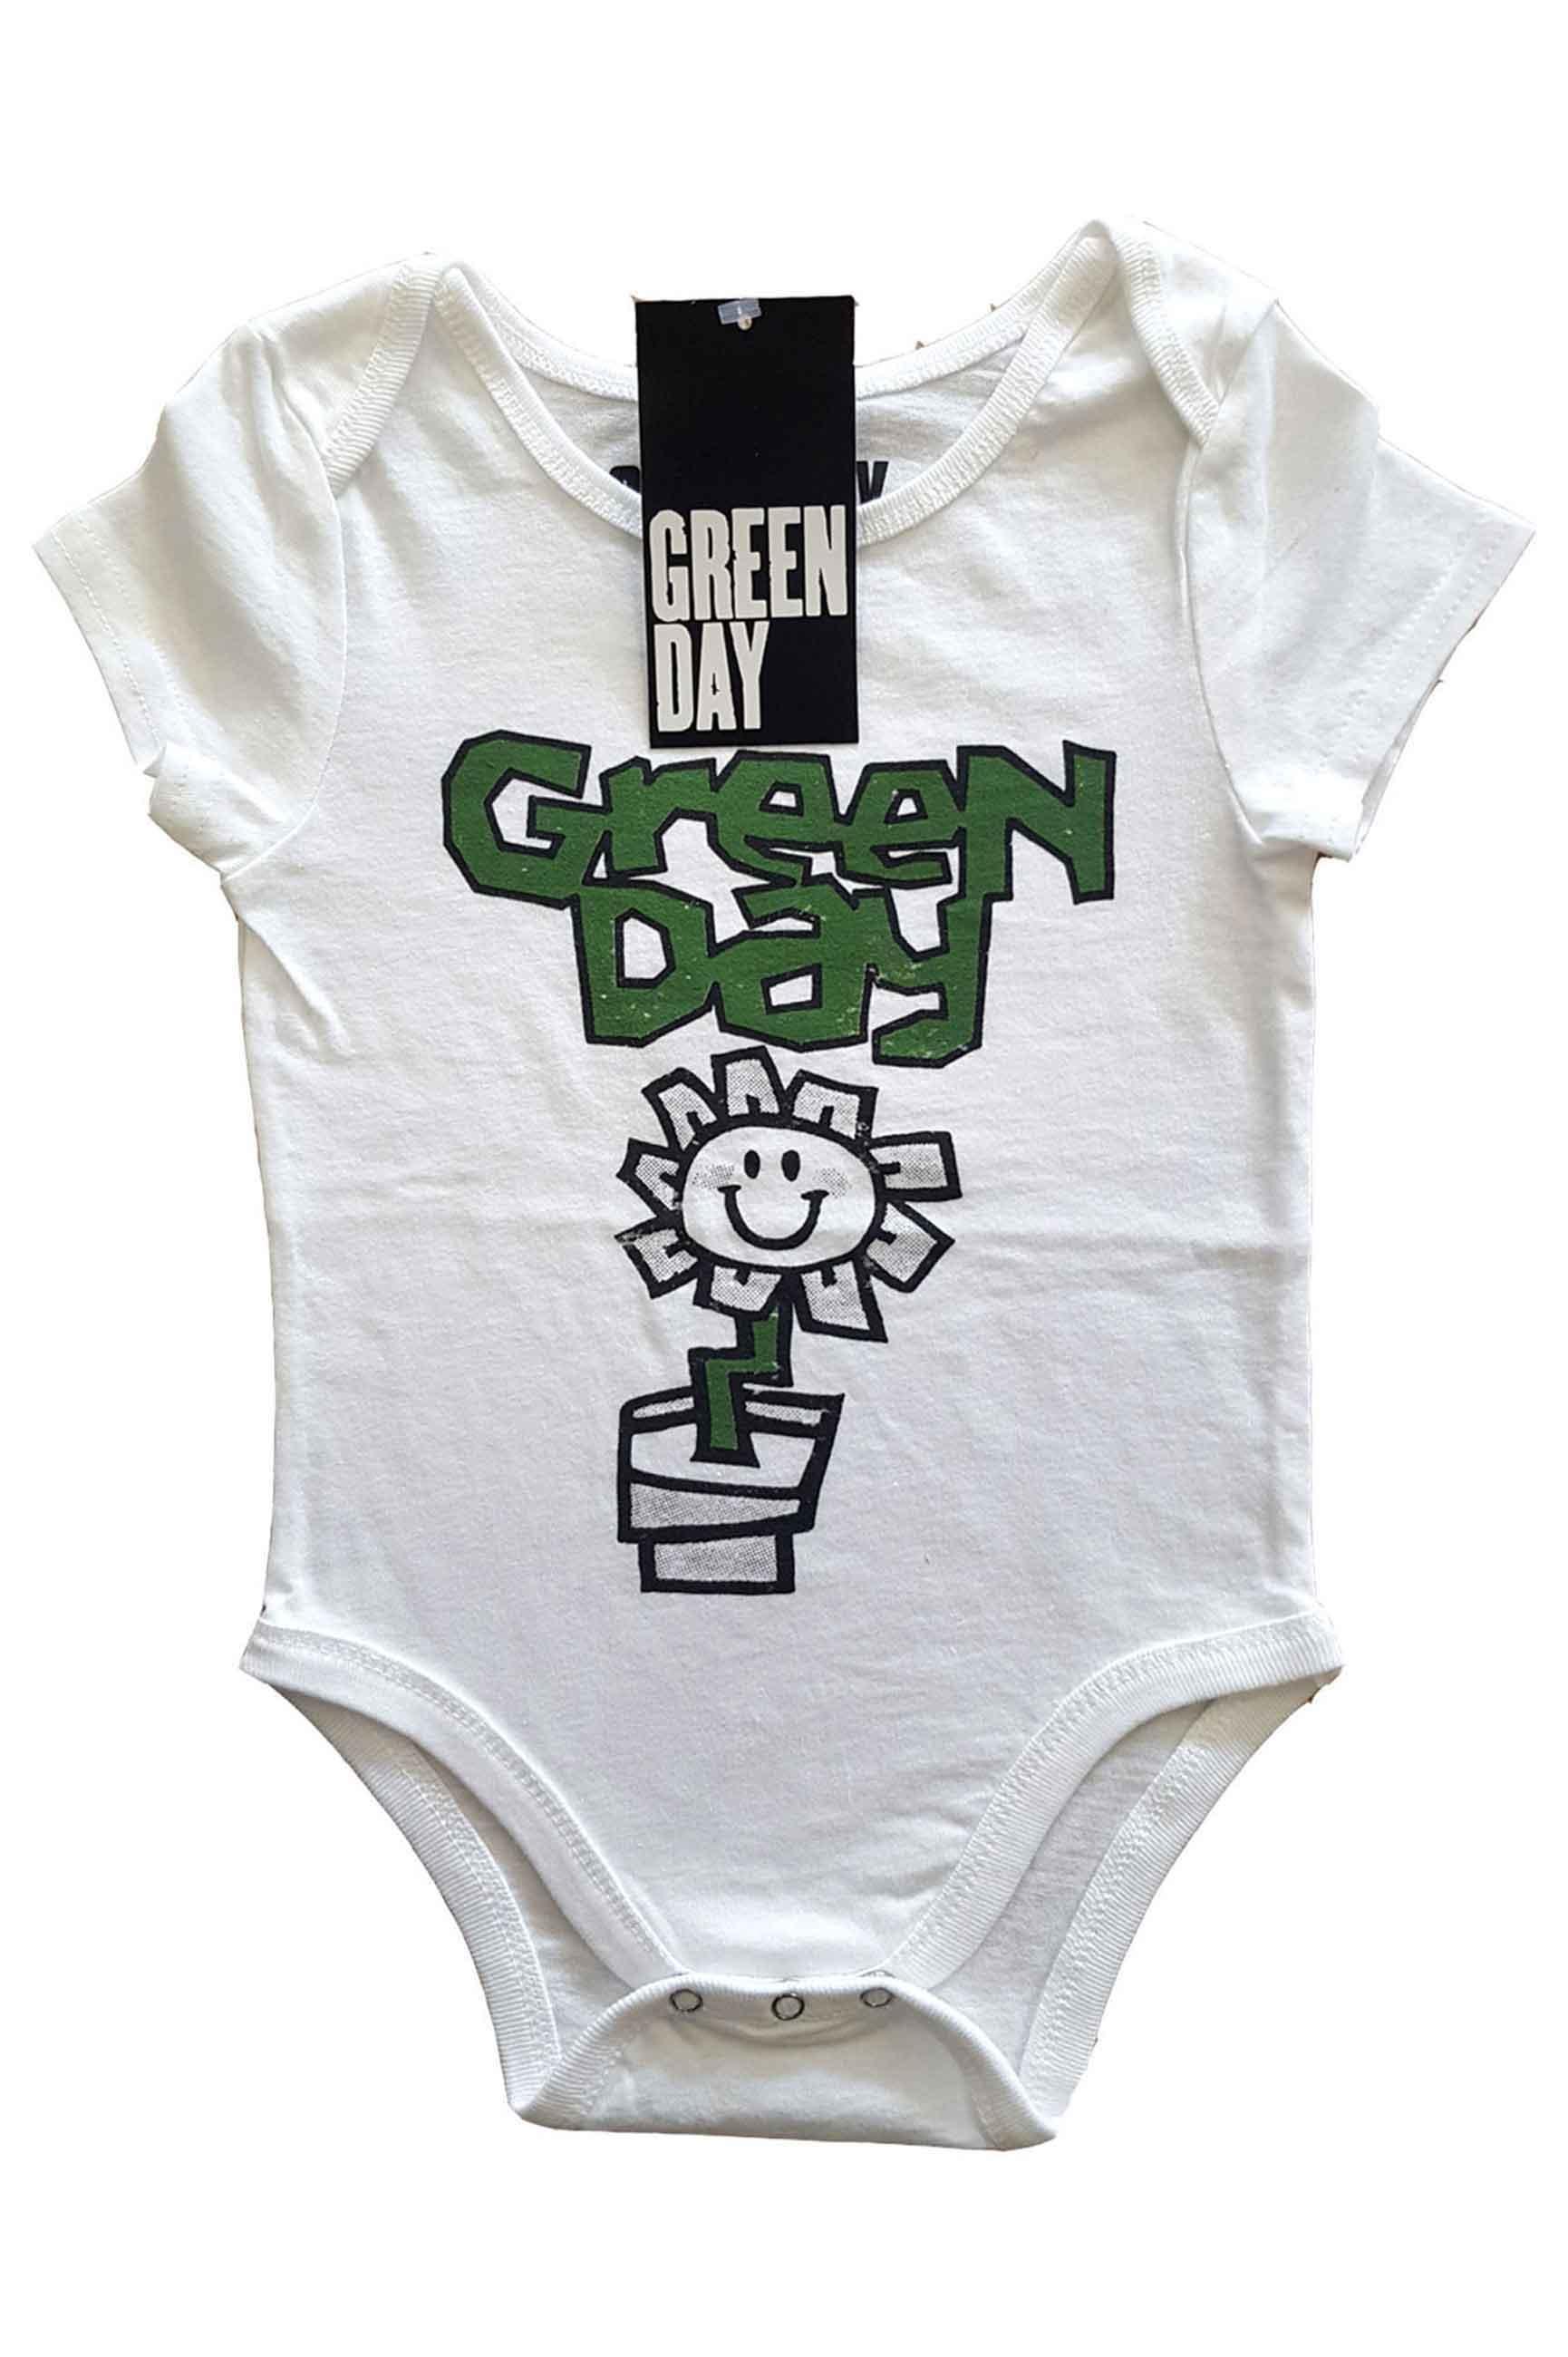 Green Day Baby Grow Flower Pot Band Logo new Official White 0 to 24 Months